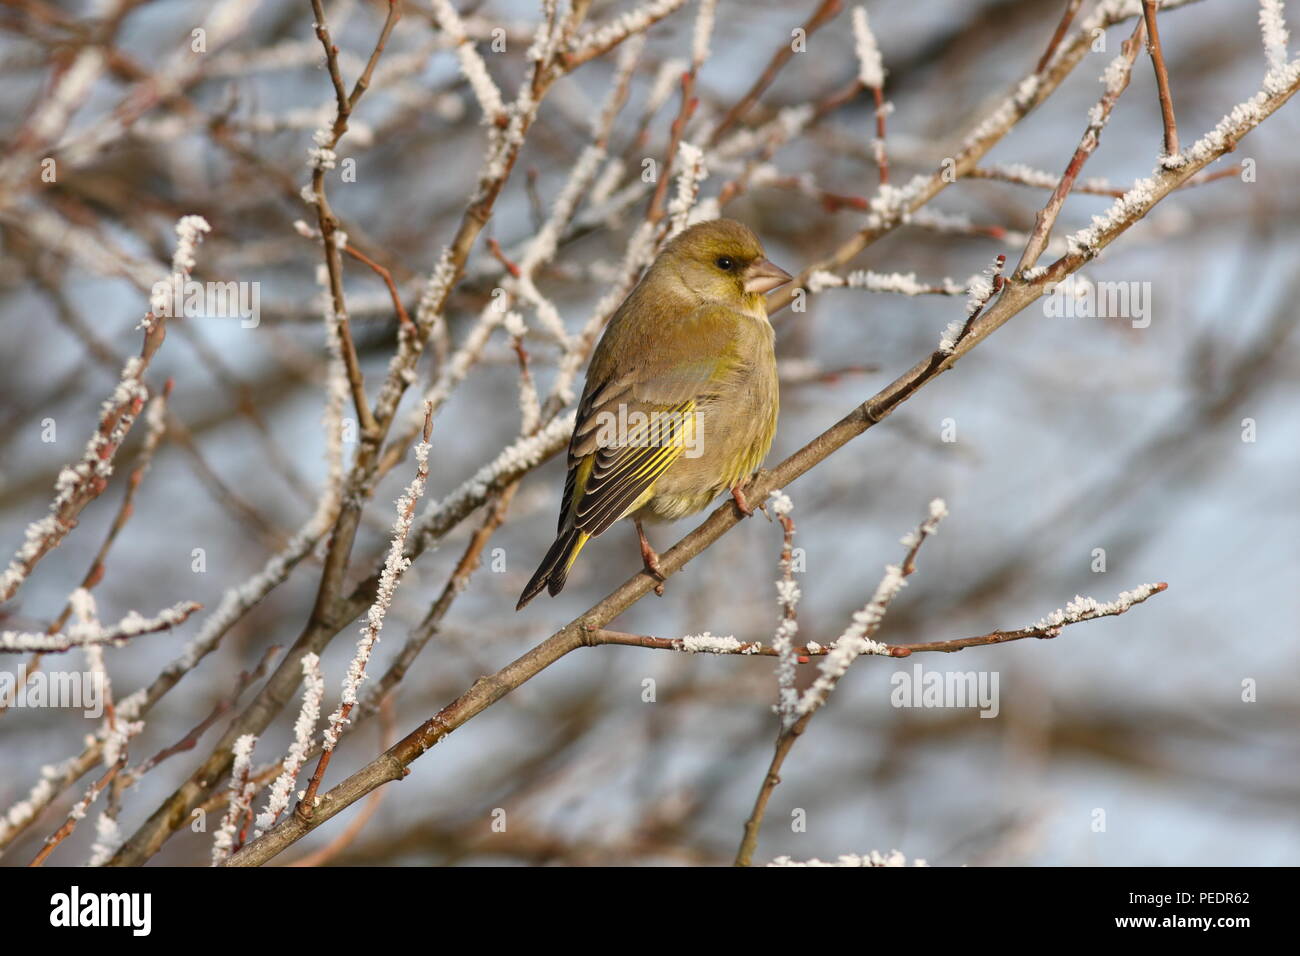 Carduelis chloris, Male Greenfinch, rear view of a bird perched in a bush within frosty branches in winter. This bird is found in Gardens and Farmland Stock Photo